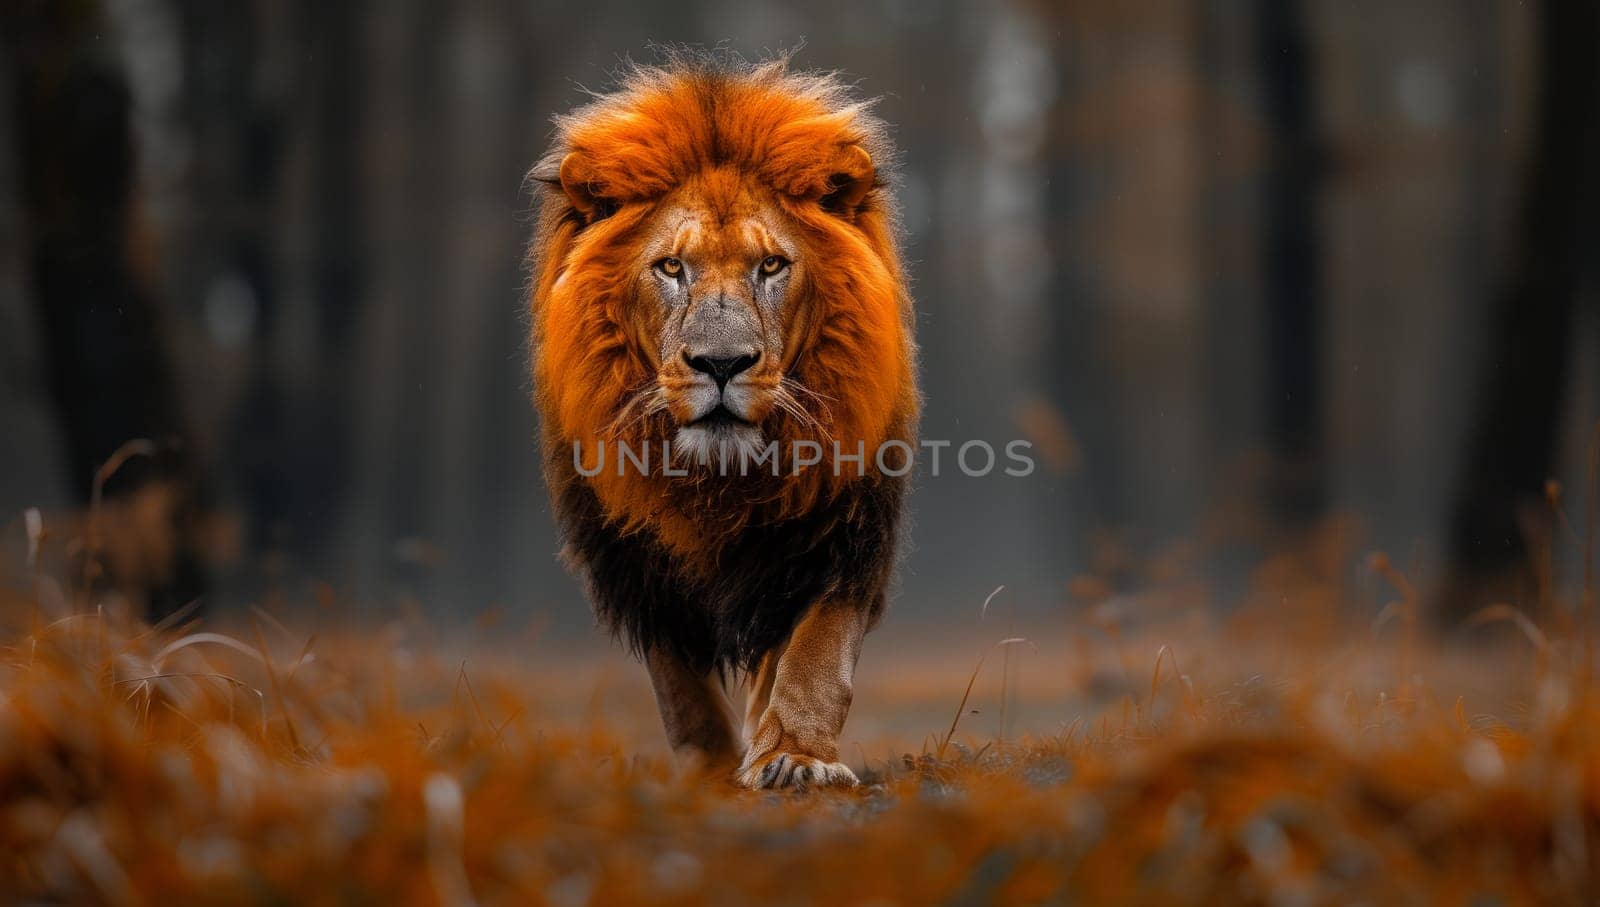 A Felidae, carnivorous big cat like a lion is strolling through the leafstrewn wood, its livercolored fur blending into the terrestrial surroundings